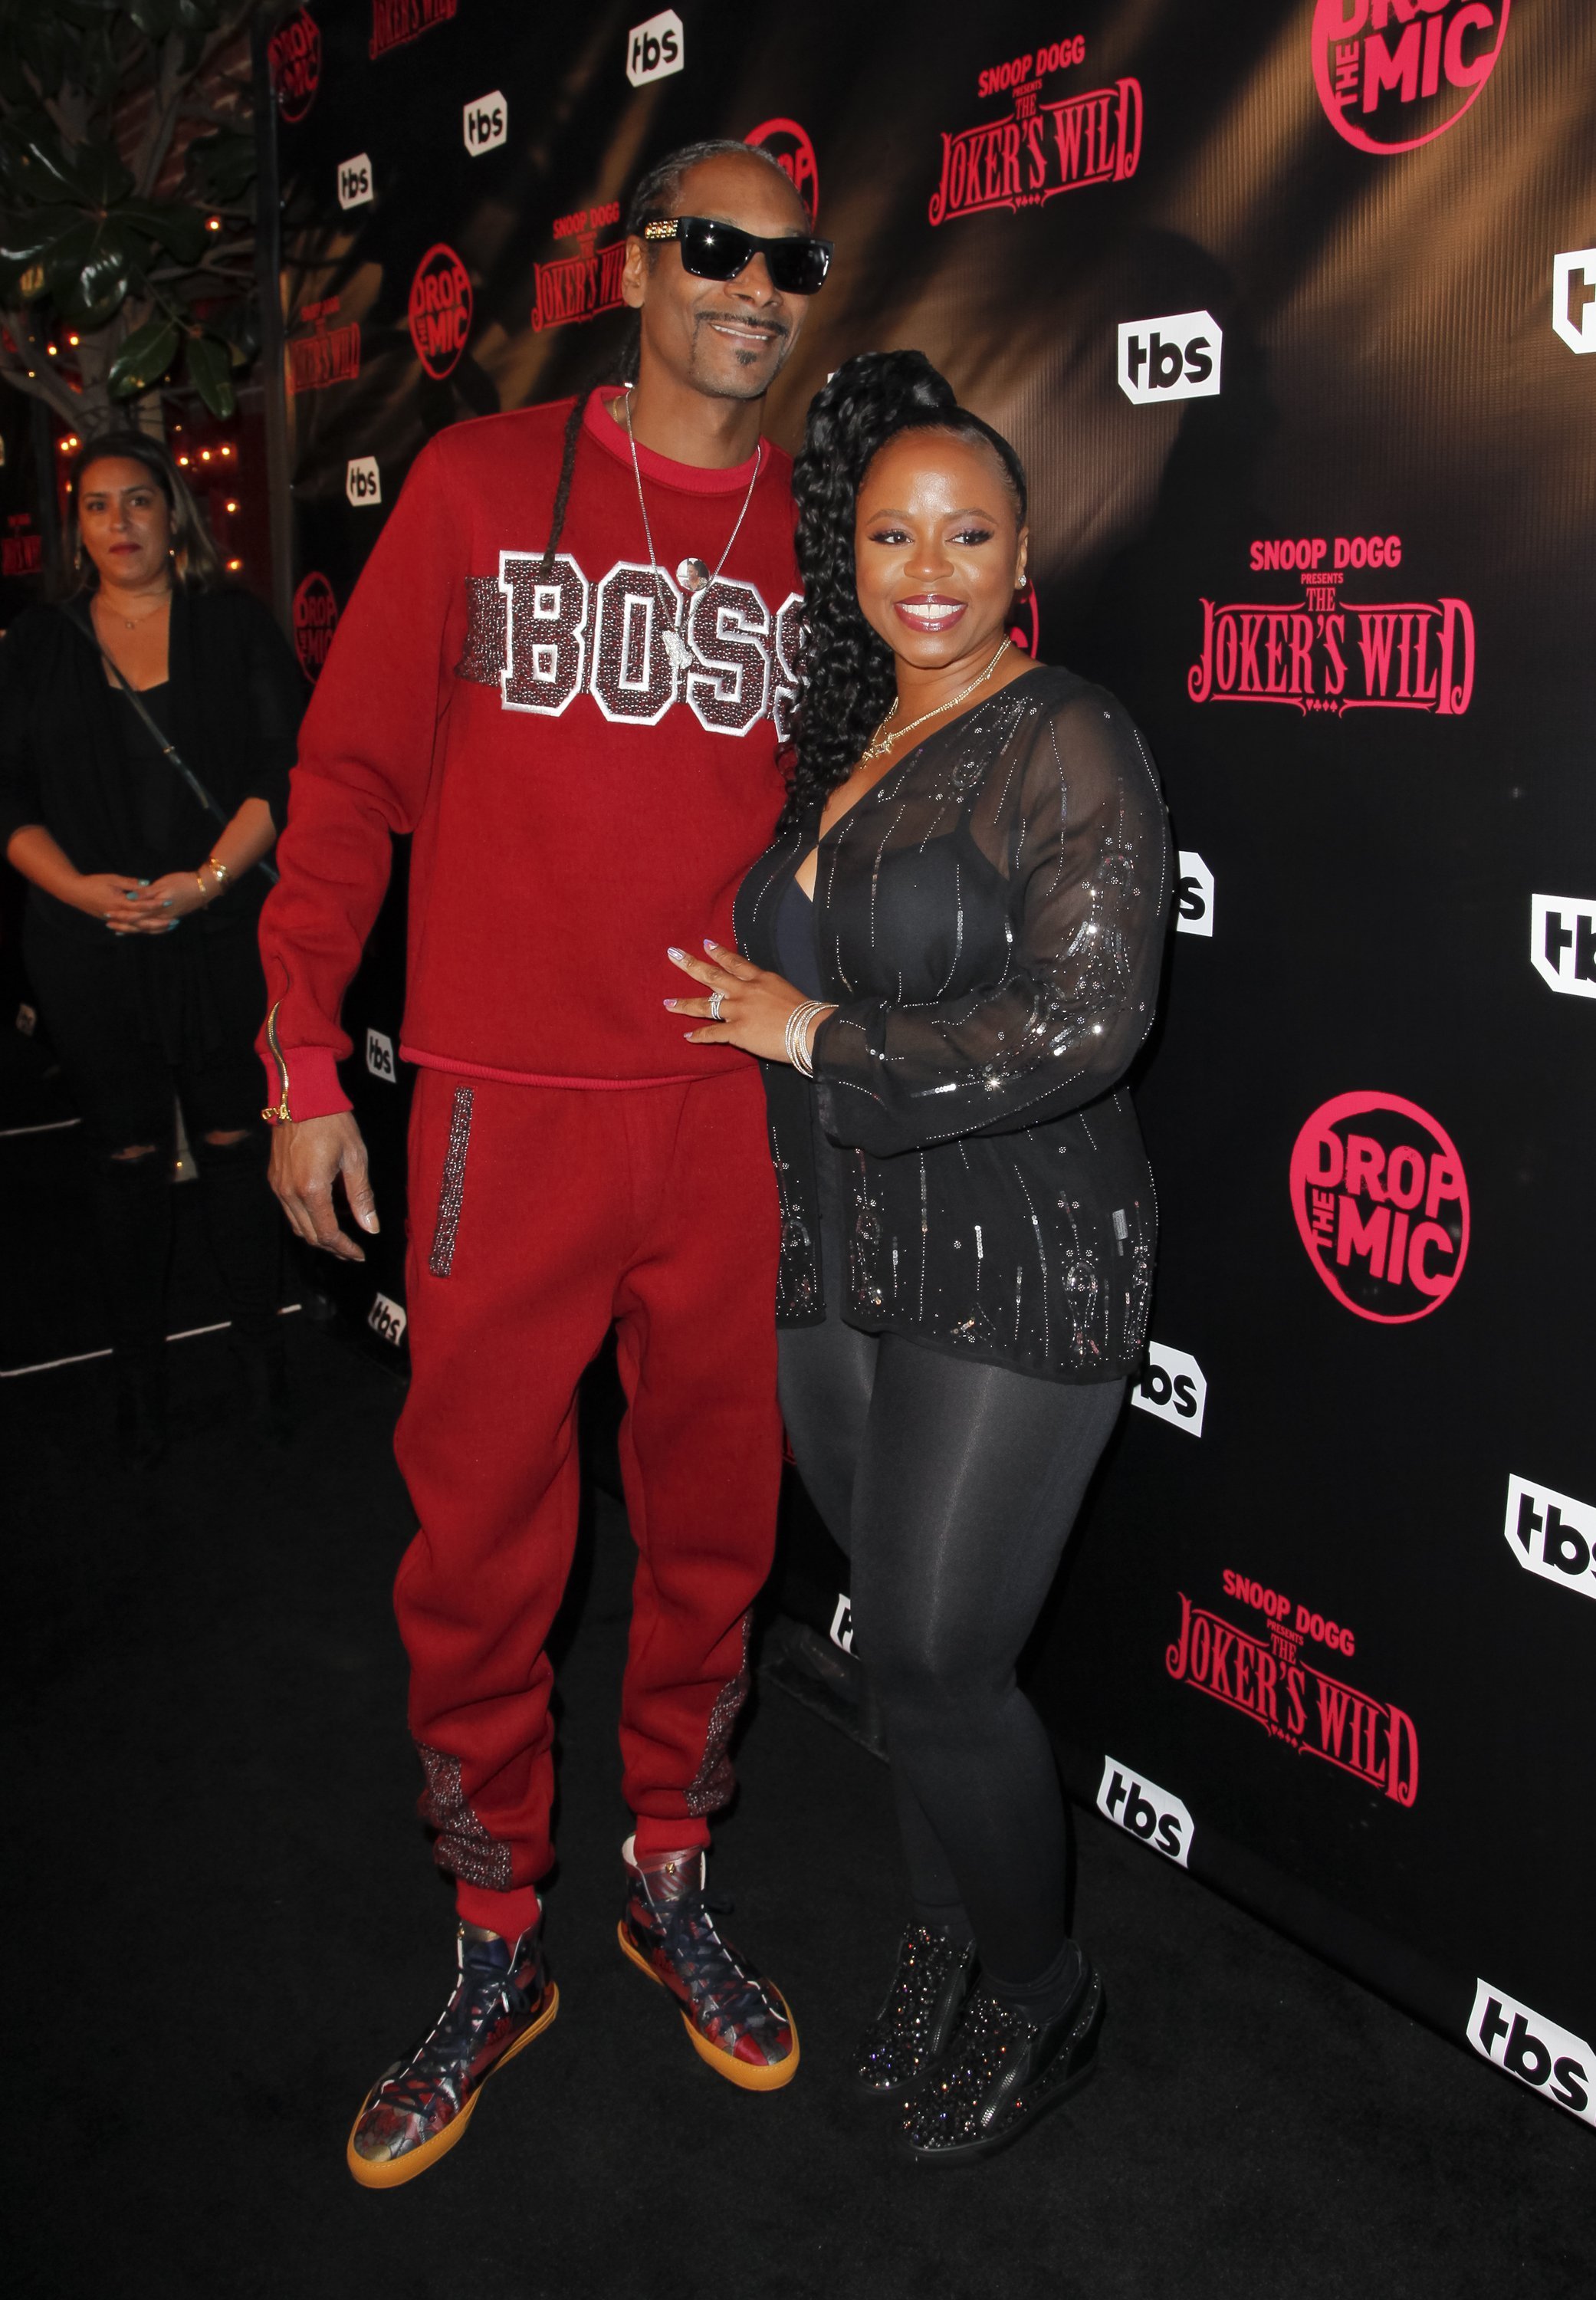 Snoop Dogg & Shante Broadus at the premiere for 'Drop The Mic' and 'The Joker's Wild' on Oct. 11, 2017 in California | Photo: Getty Images